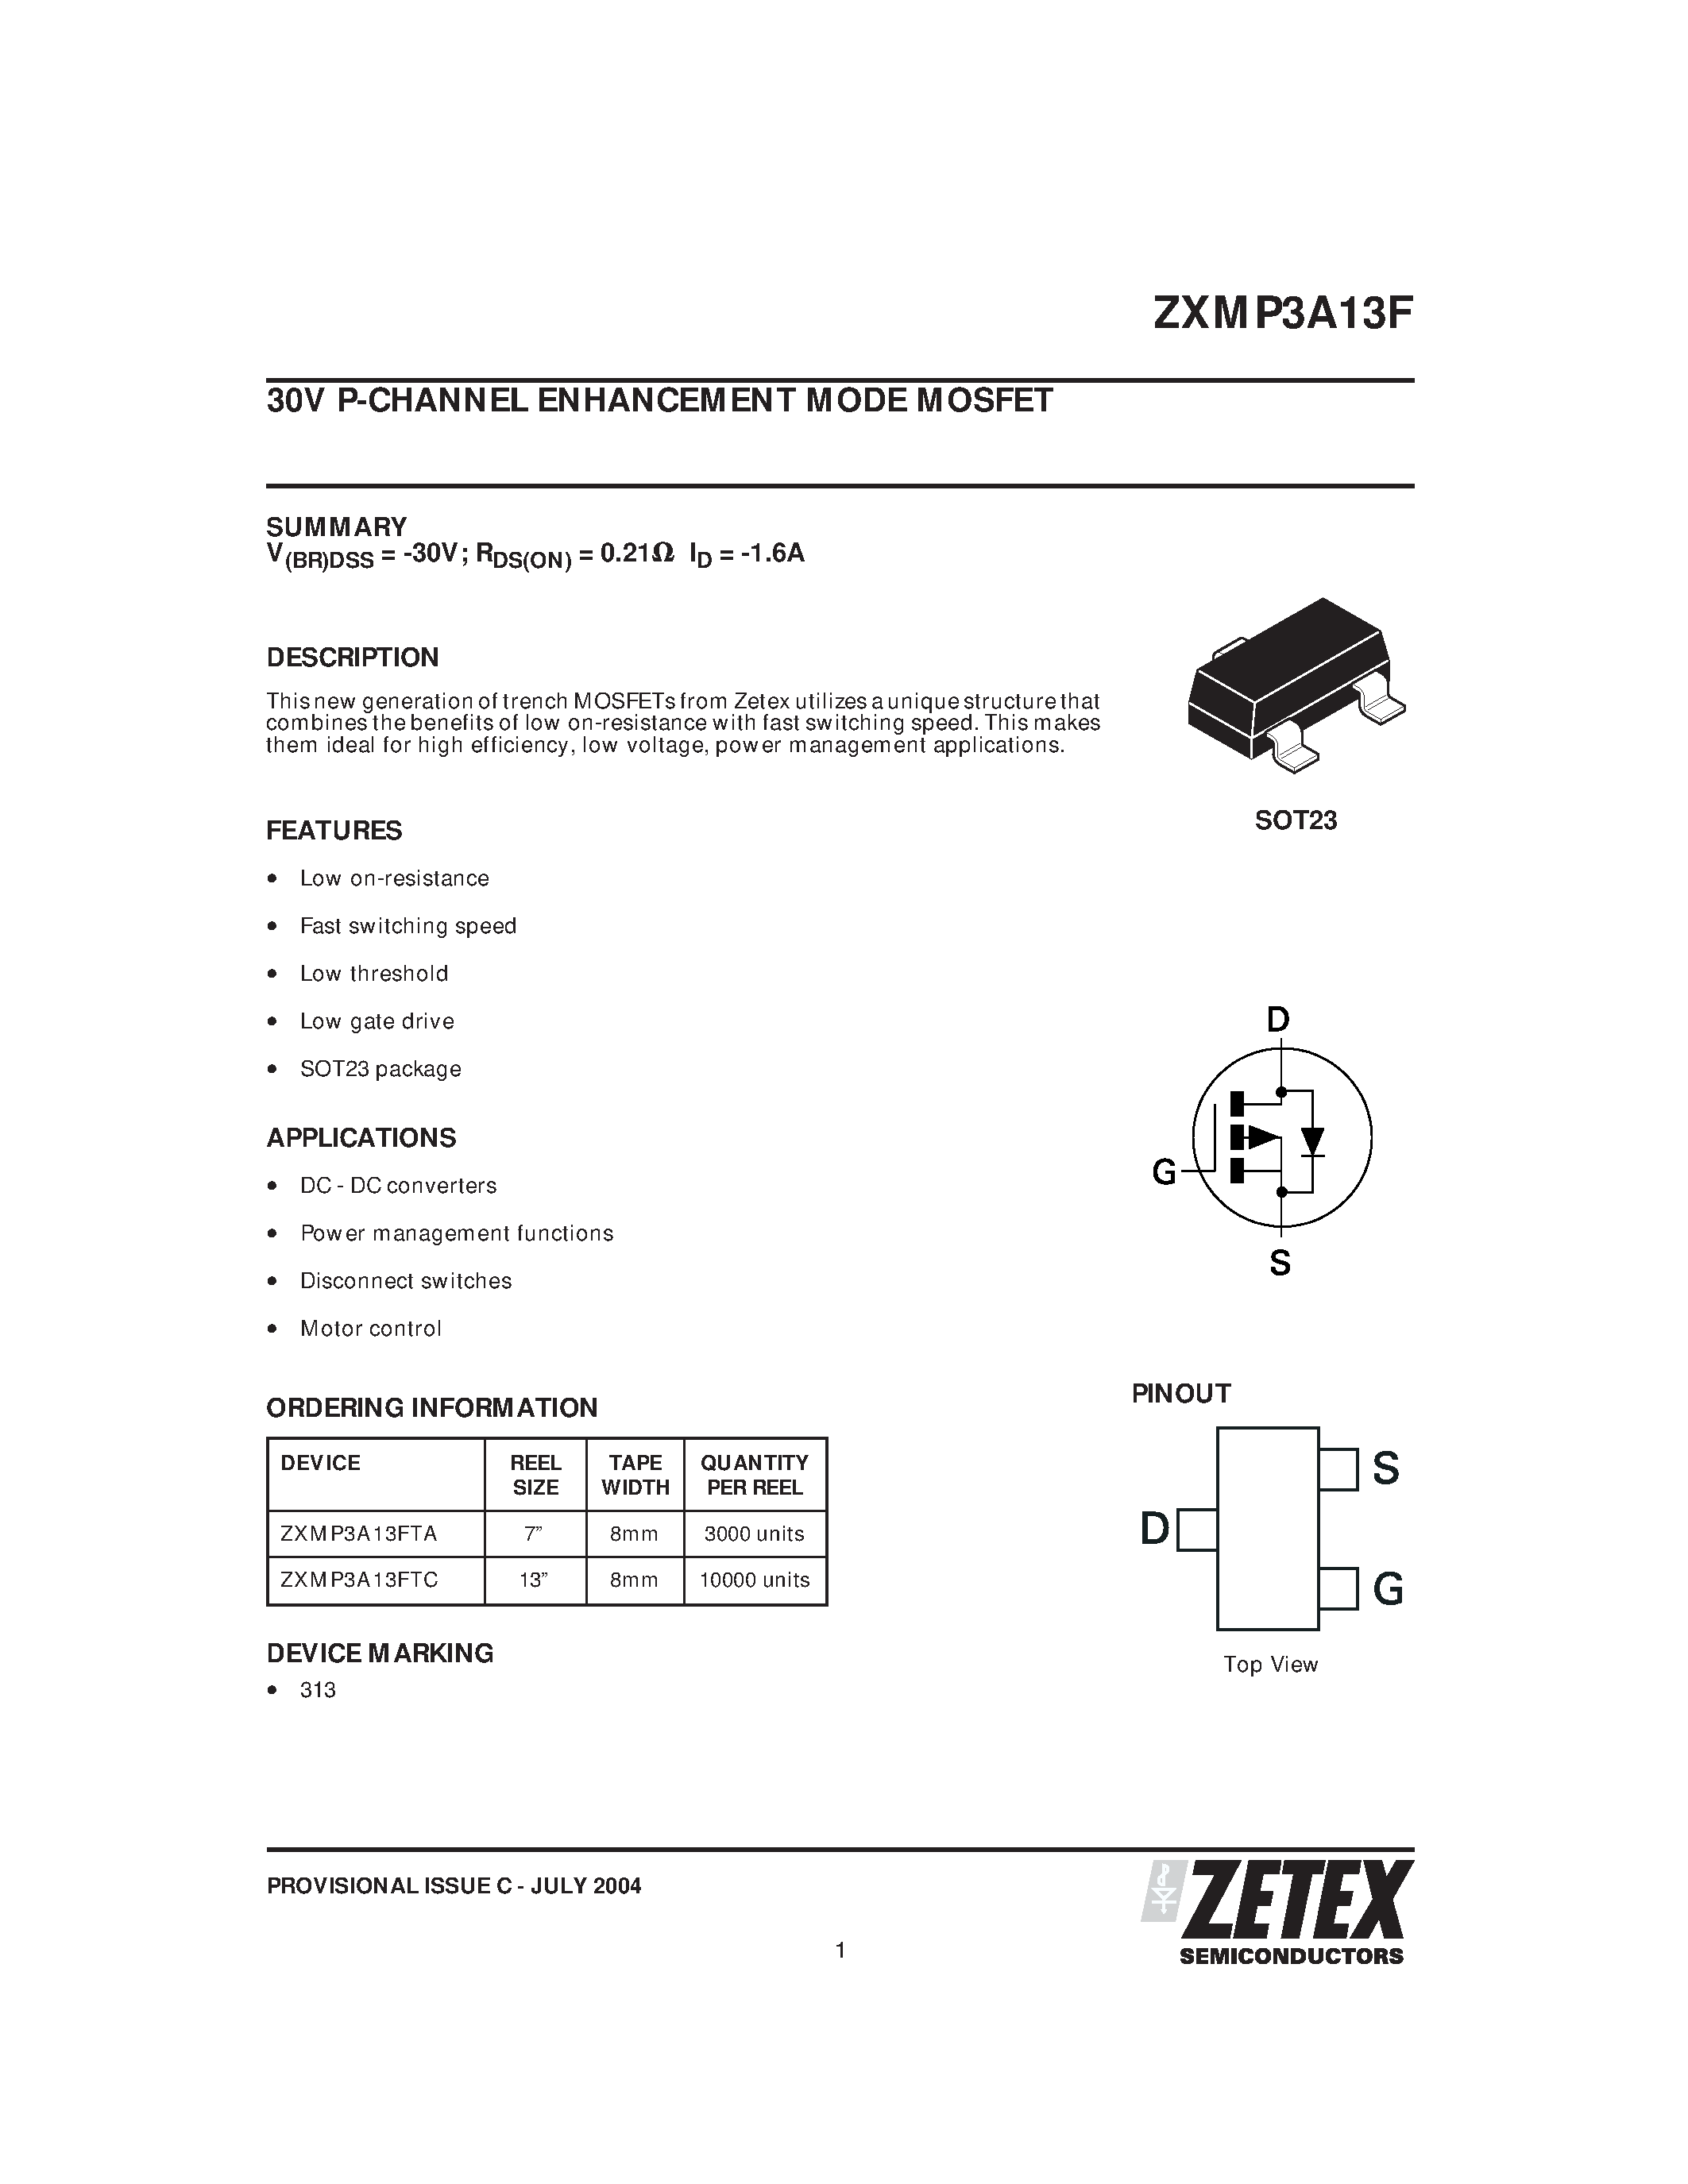 Datasheet ZXMP3A13F - 30V P-CHANNEL ENHANCEMENT MODE MOSFET page 1